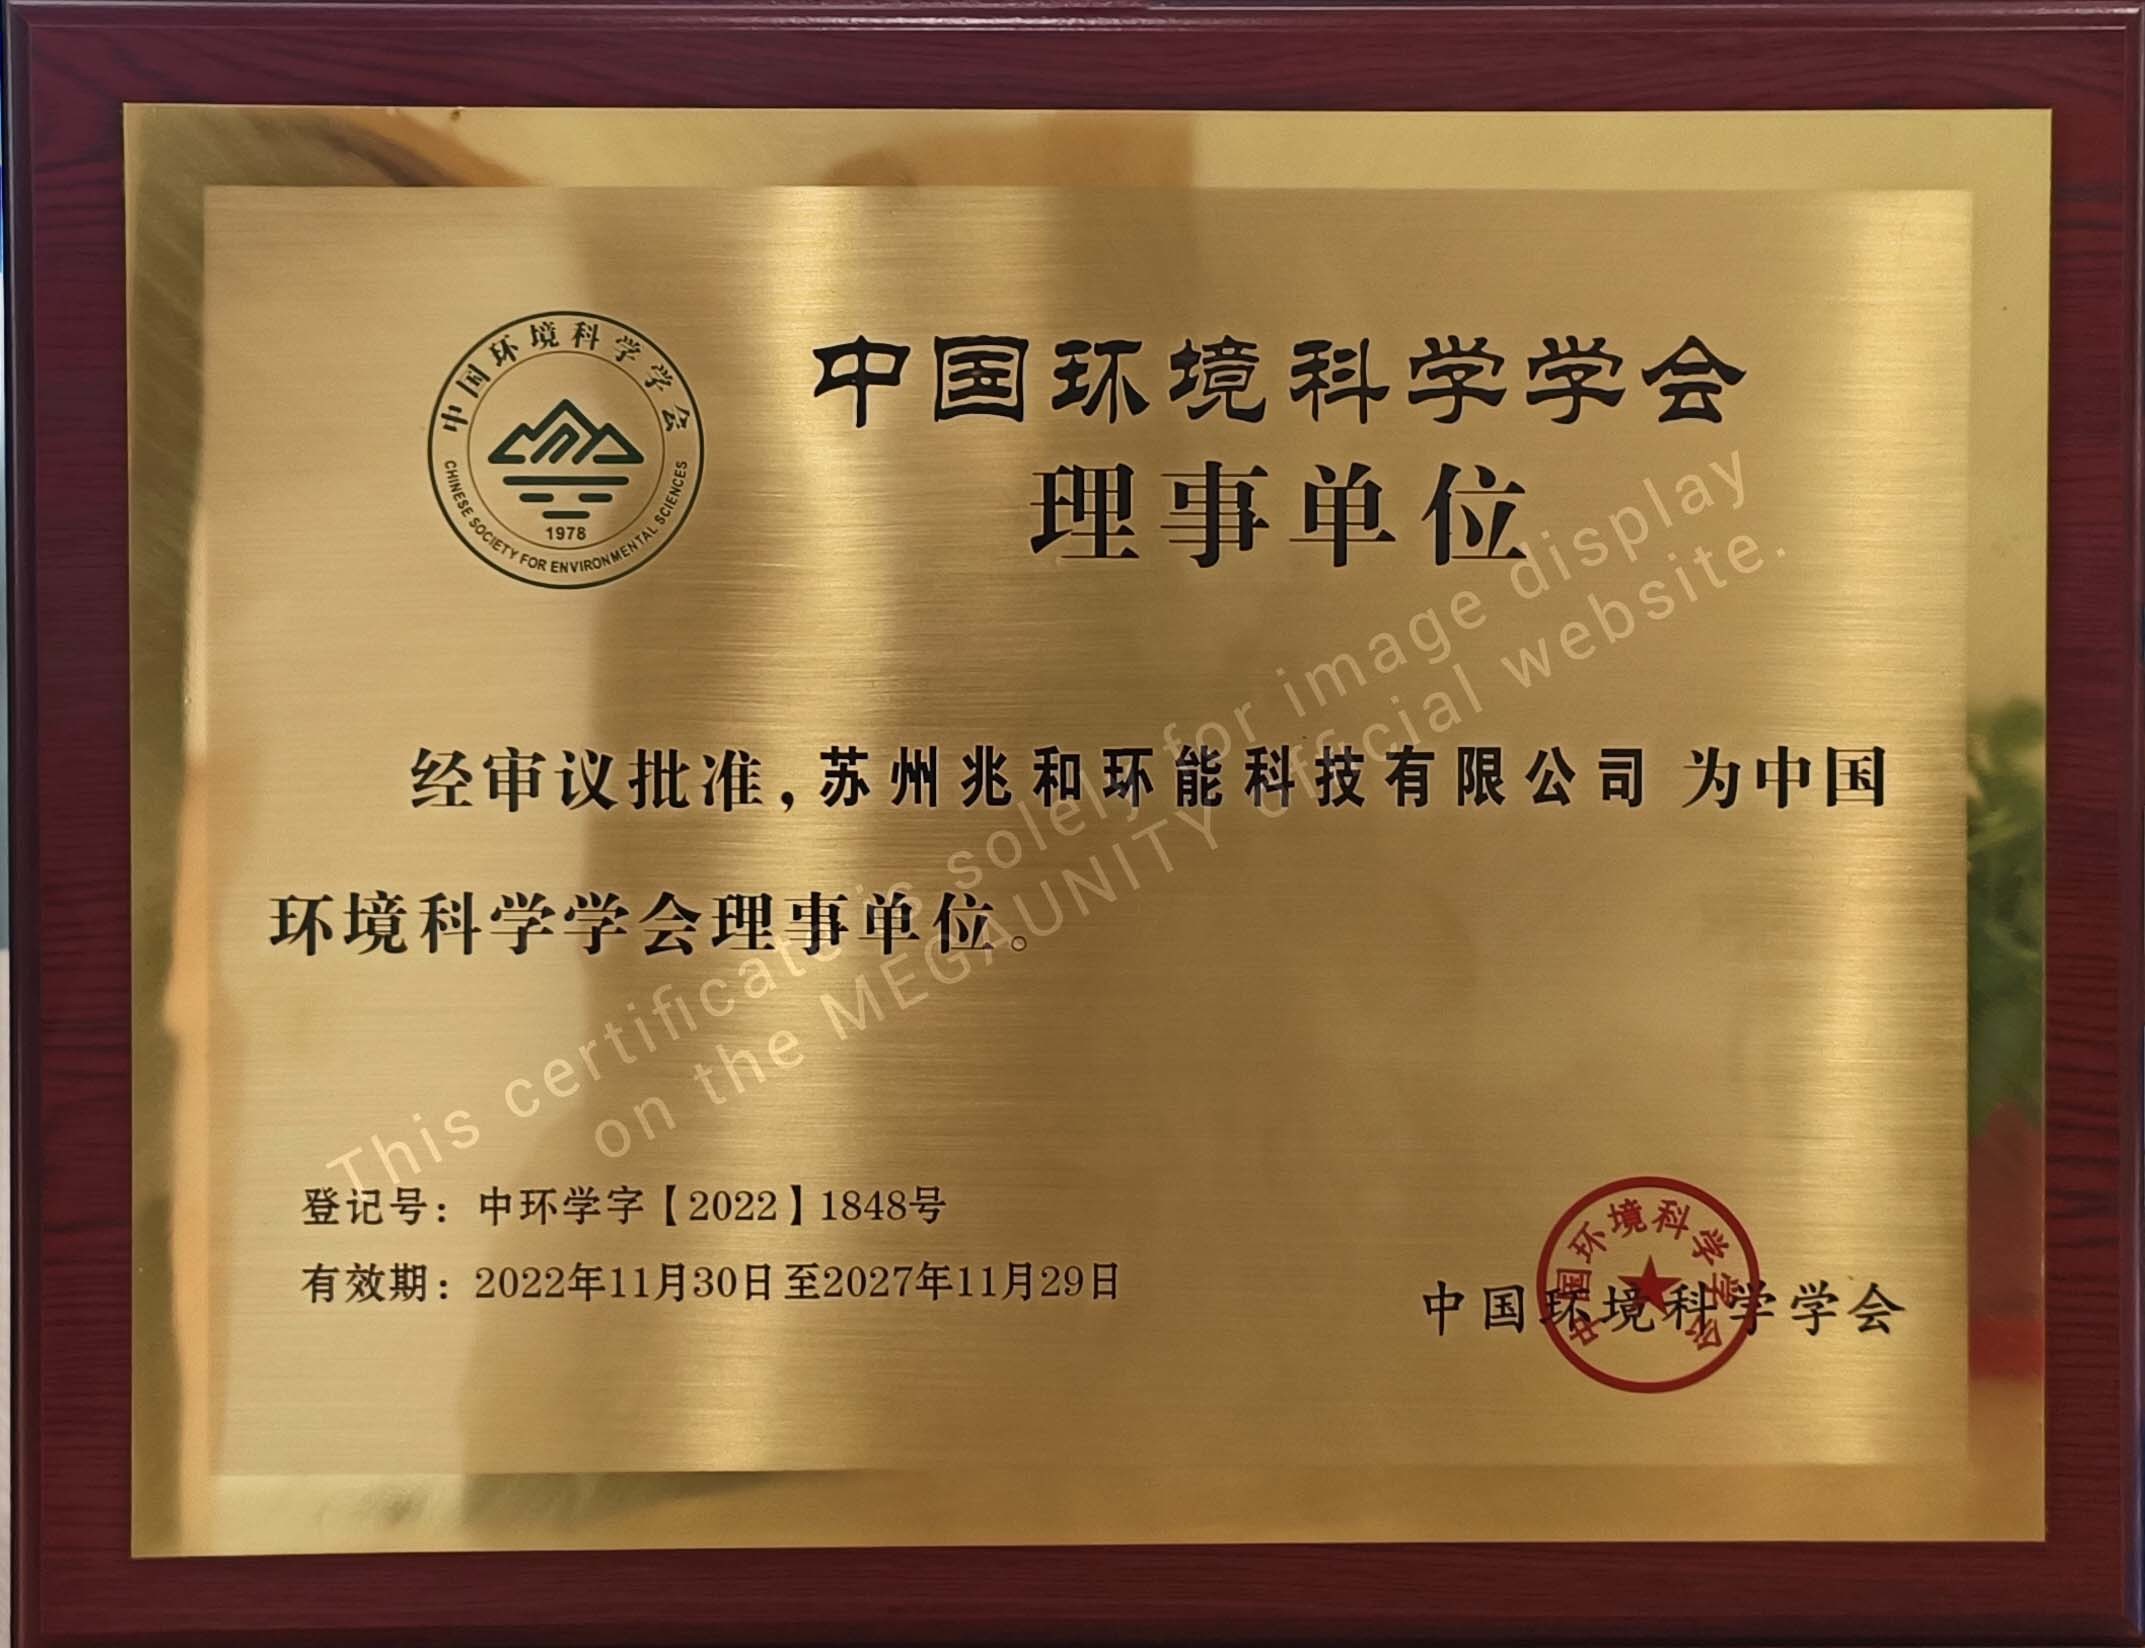 Awarded as a Council Unit of the Chinese Society for Environmental Sciences